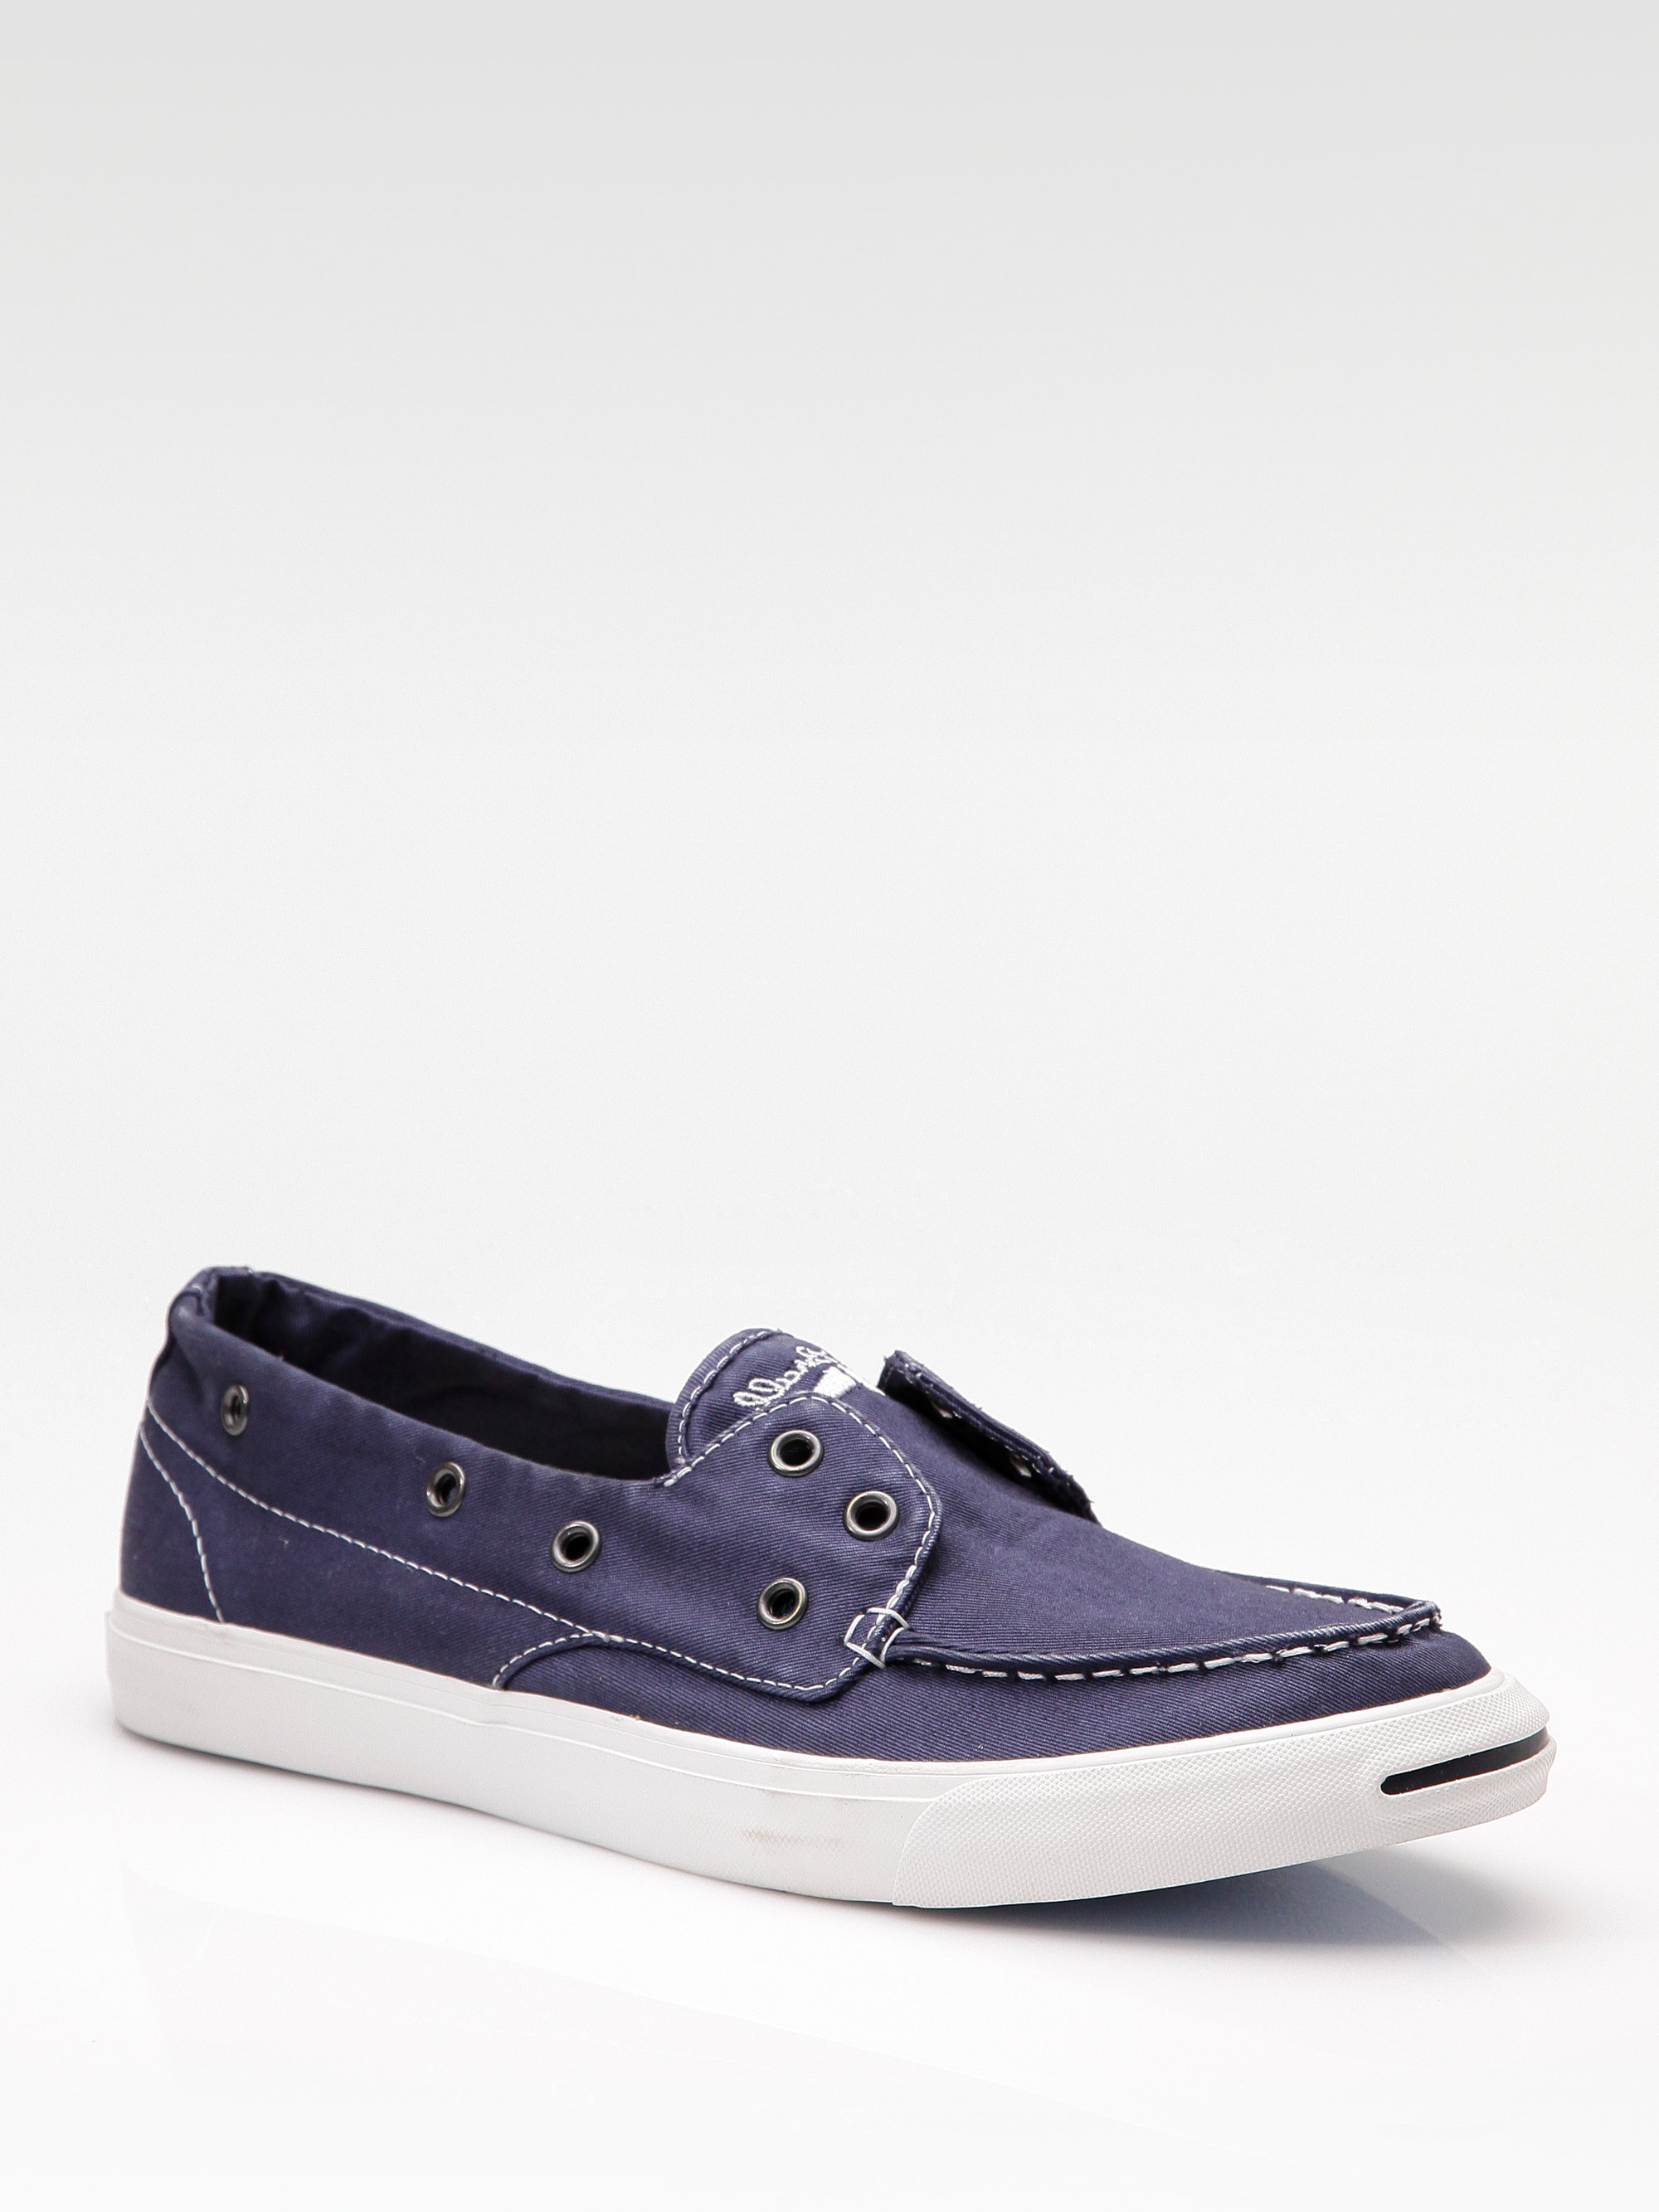 Converse Jack Purcell Twill Boat Shoes in Navy/White (Blue) for Men - Lyst